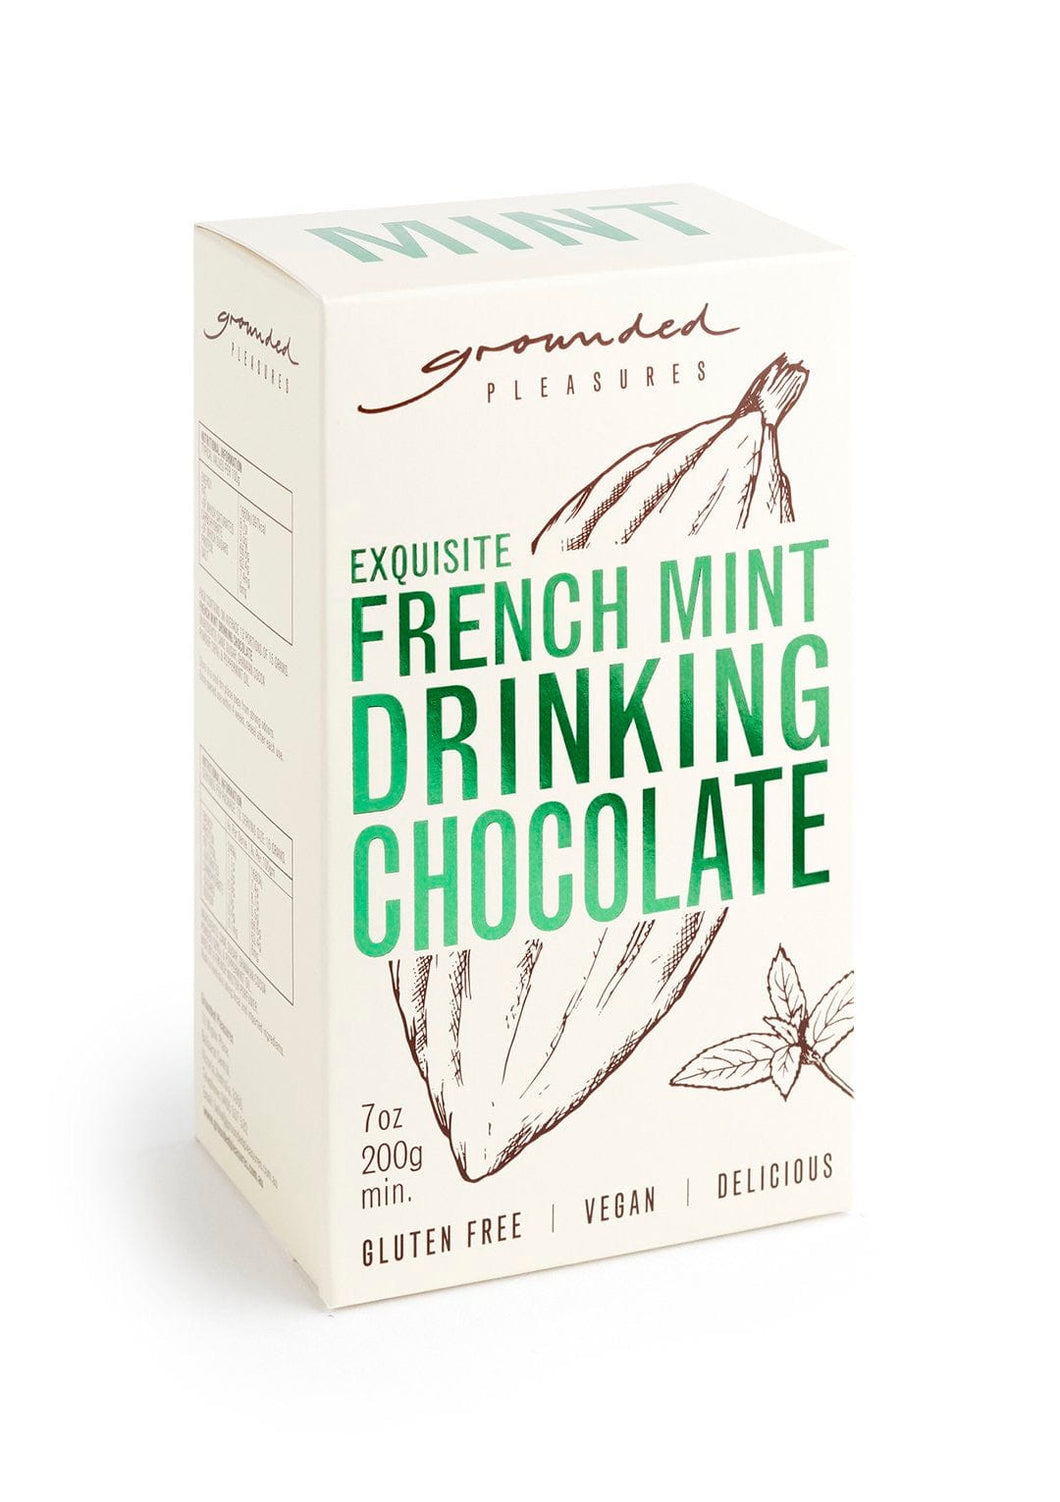 Grounded Pleasures- FRENCH MINT DRINKING CHOCOLATE